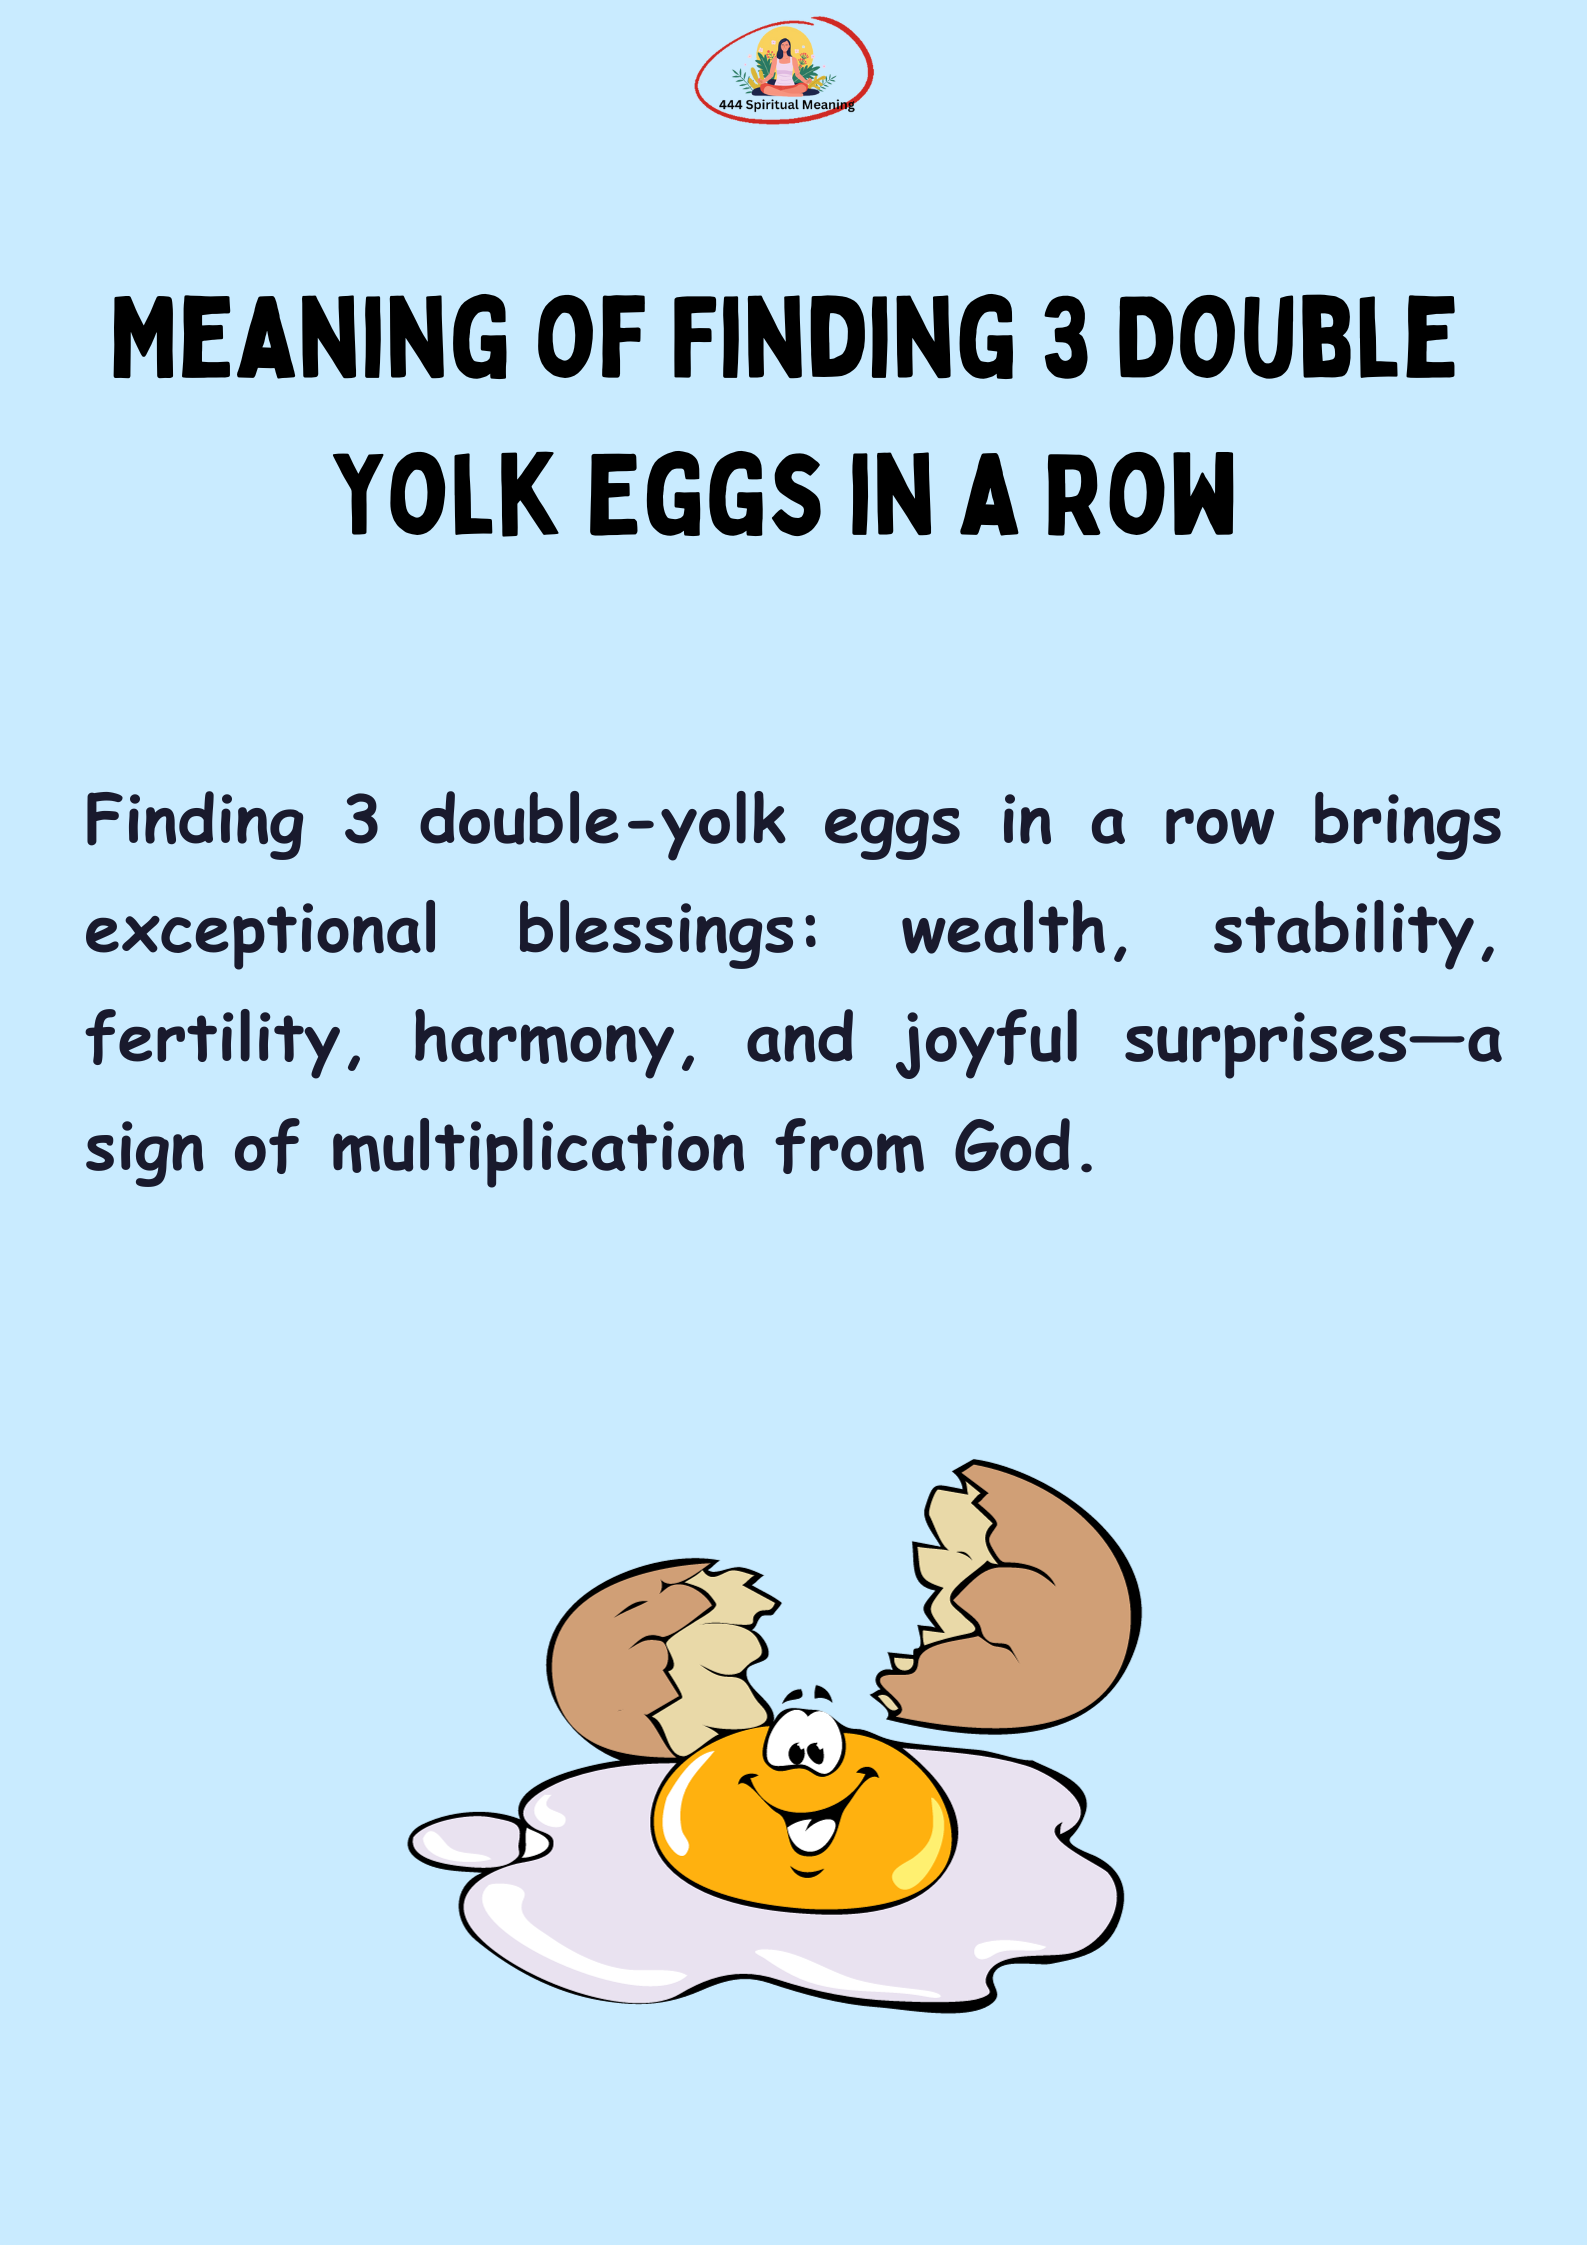 Finding 3 double-yolk eggs in a row brings exceptional blessings: wealth, stability, fertility, harmony, and joyful surprises—a sign of multiplication from God.